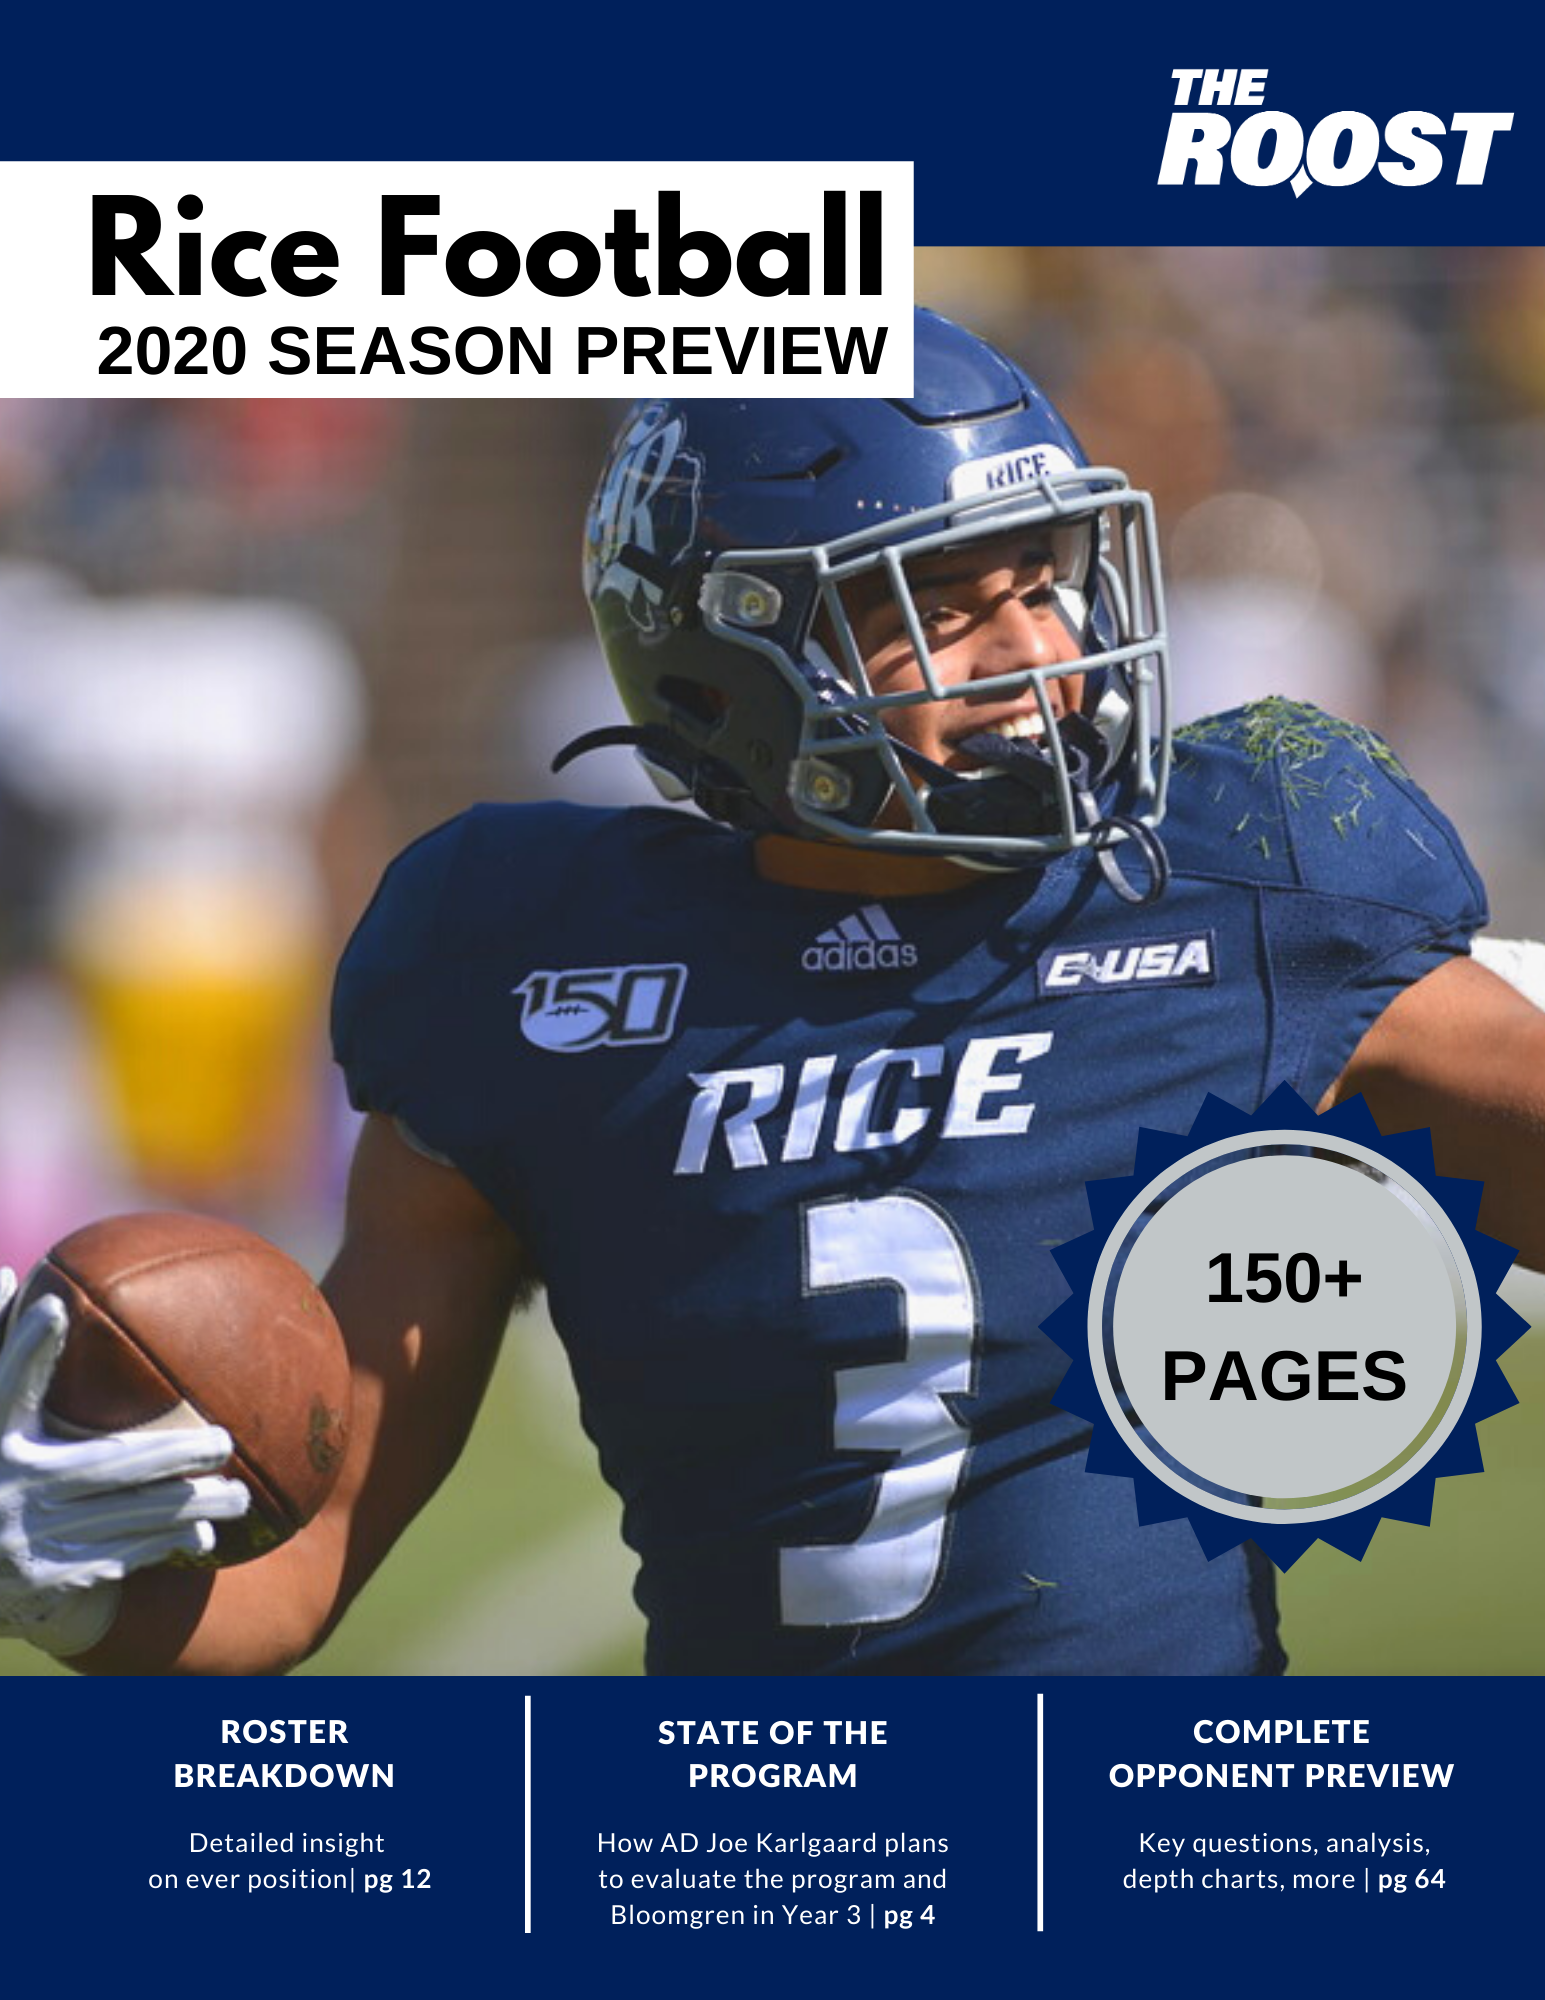 The Roost's 2020 Rice Football Season Preview and CUSA Preview